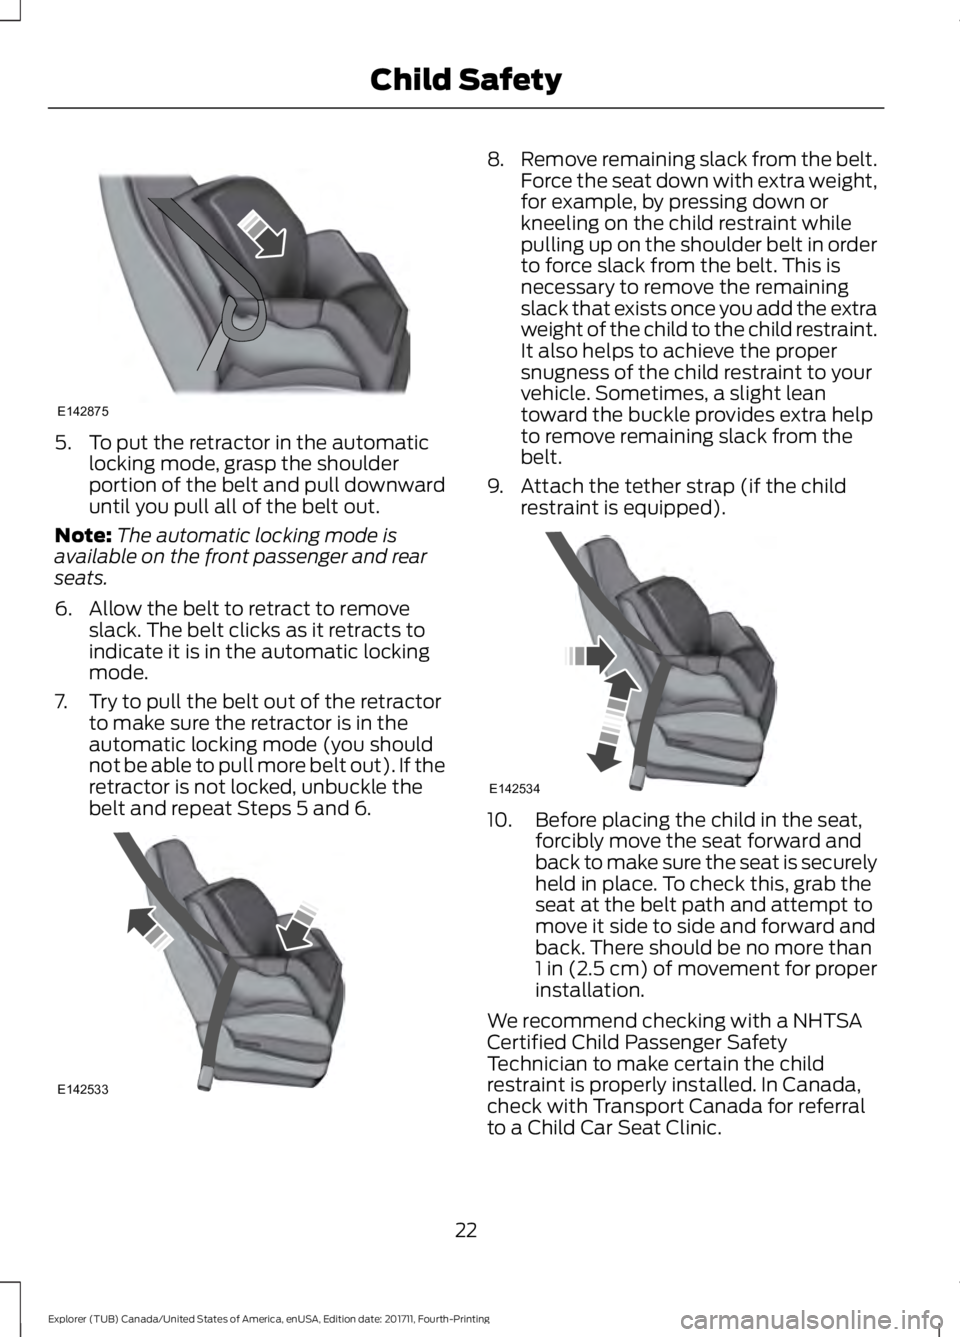 FORD EXPLORER 2018  Owners Manual 5. To put the retractor in the automatic
locking mode, grasp the shoulder
portion of the belt and pull downward
until you pull all of the belt out.
Note: The automatic locking mode is
available on the